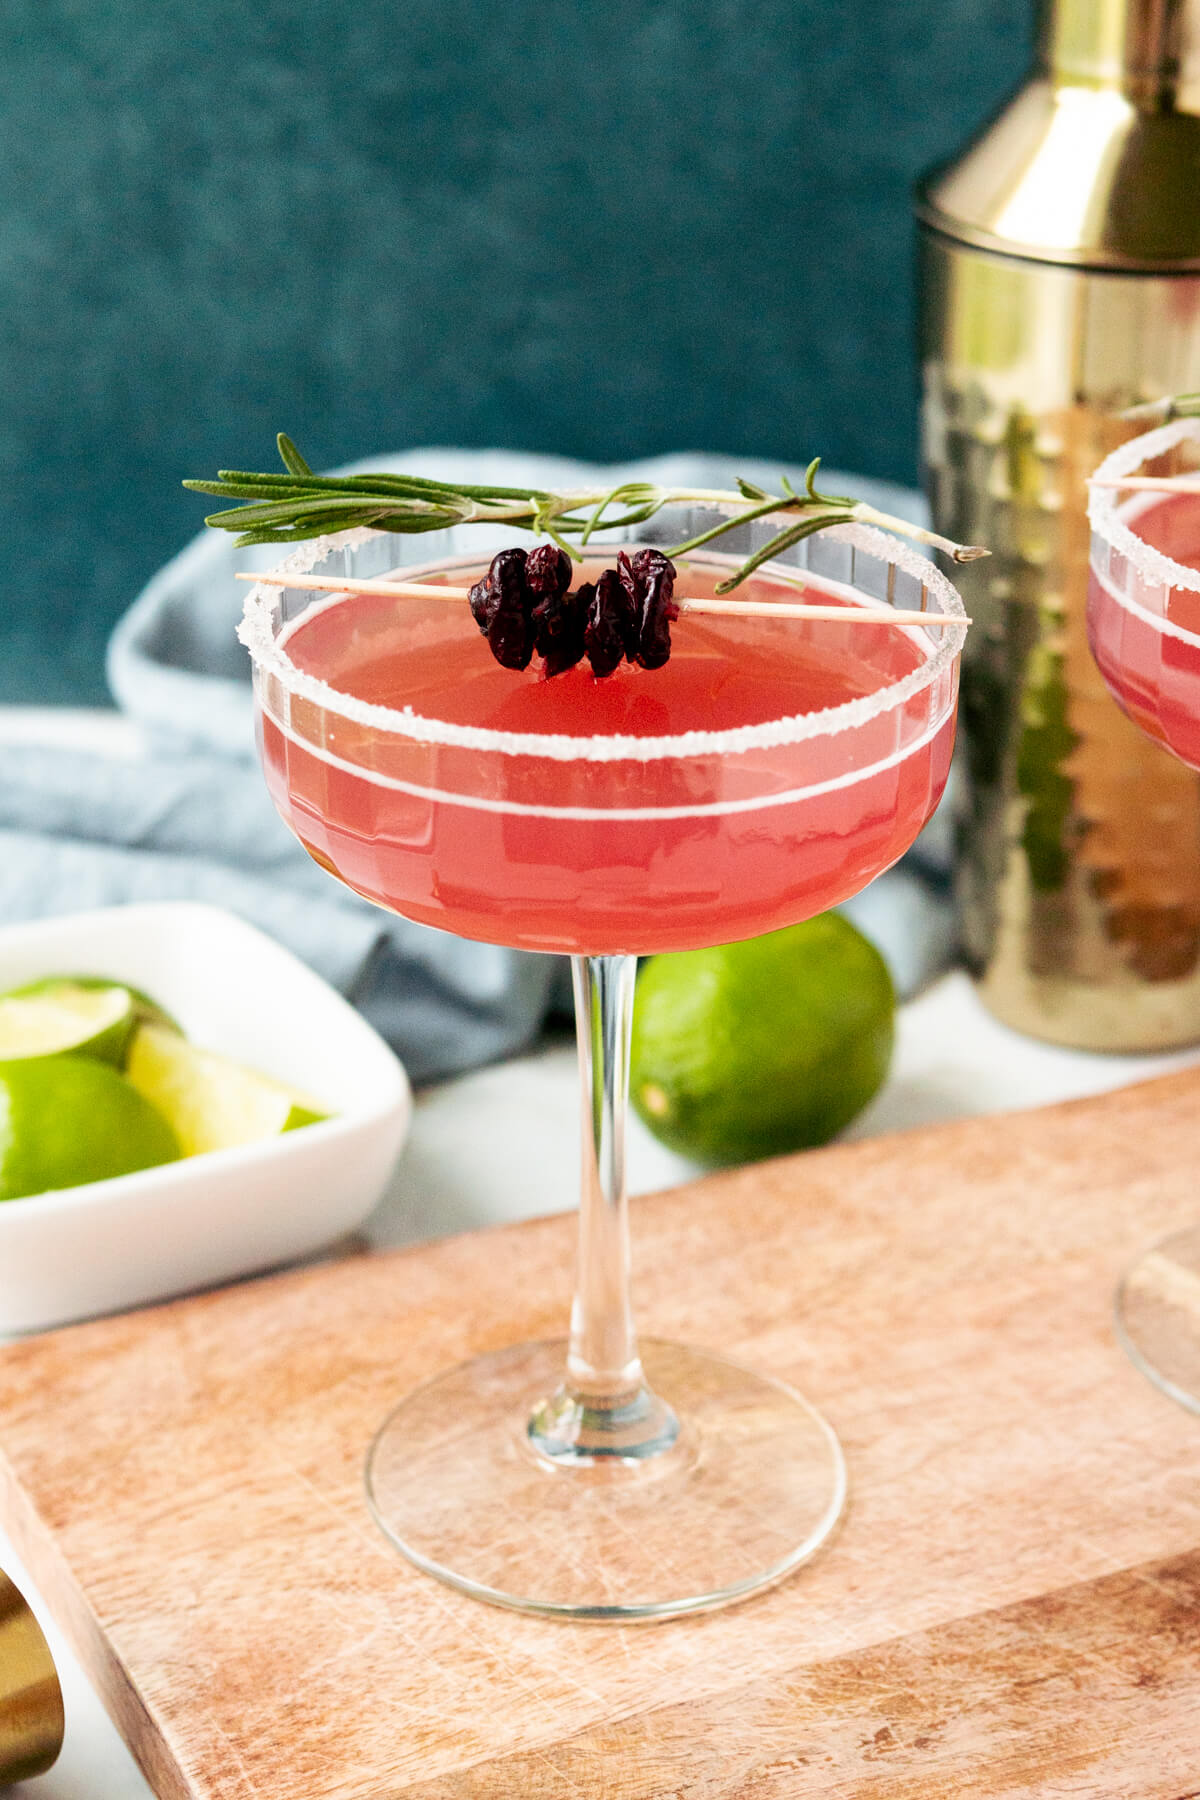 A cranberry Mistletoe margarita garnished with dried cranberries and rosemary in a coupe glass with limes and a cocktail shaker in the background. This is a delicious looking winter margarita recipe. 